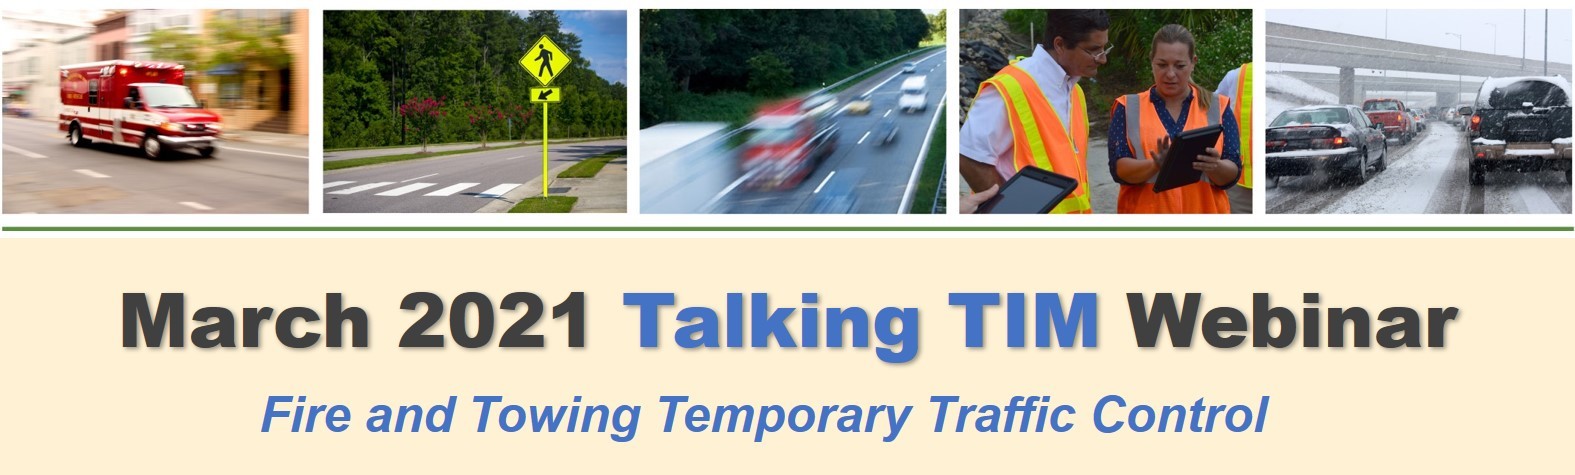 March 2021 Talking TIM Webinar:  Fire and Towing Temporary Traffic Control